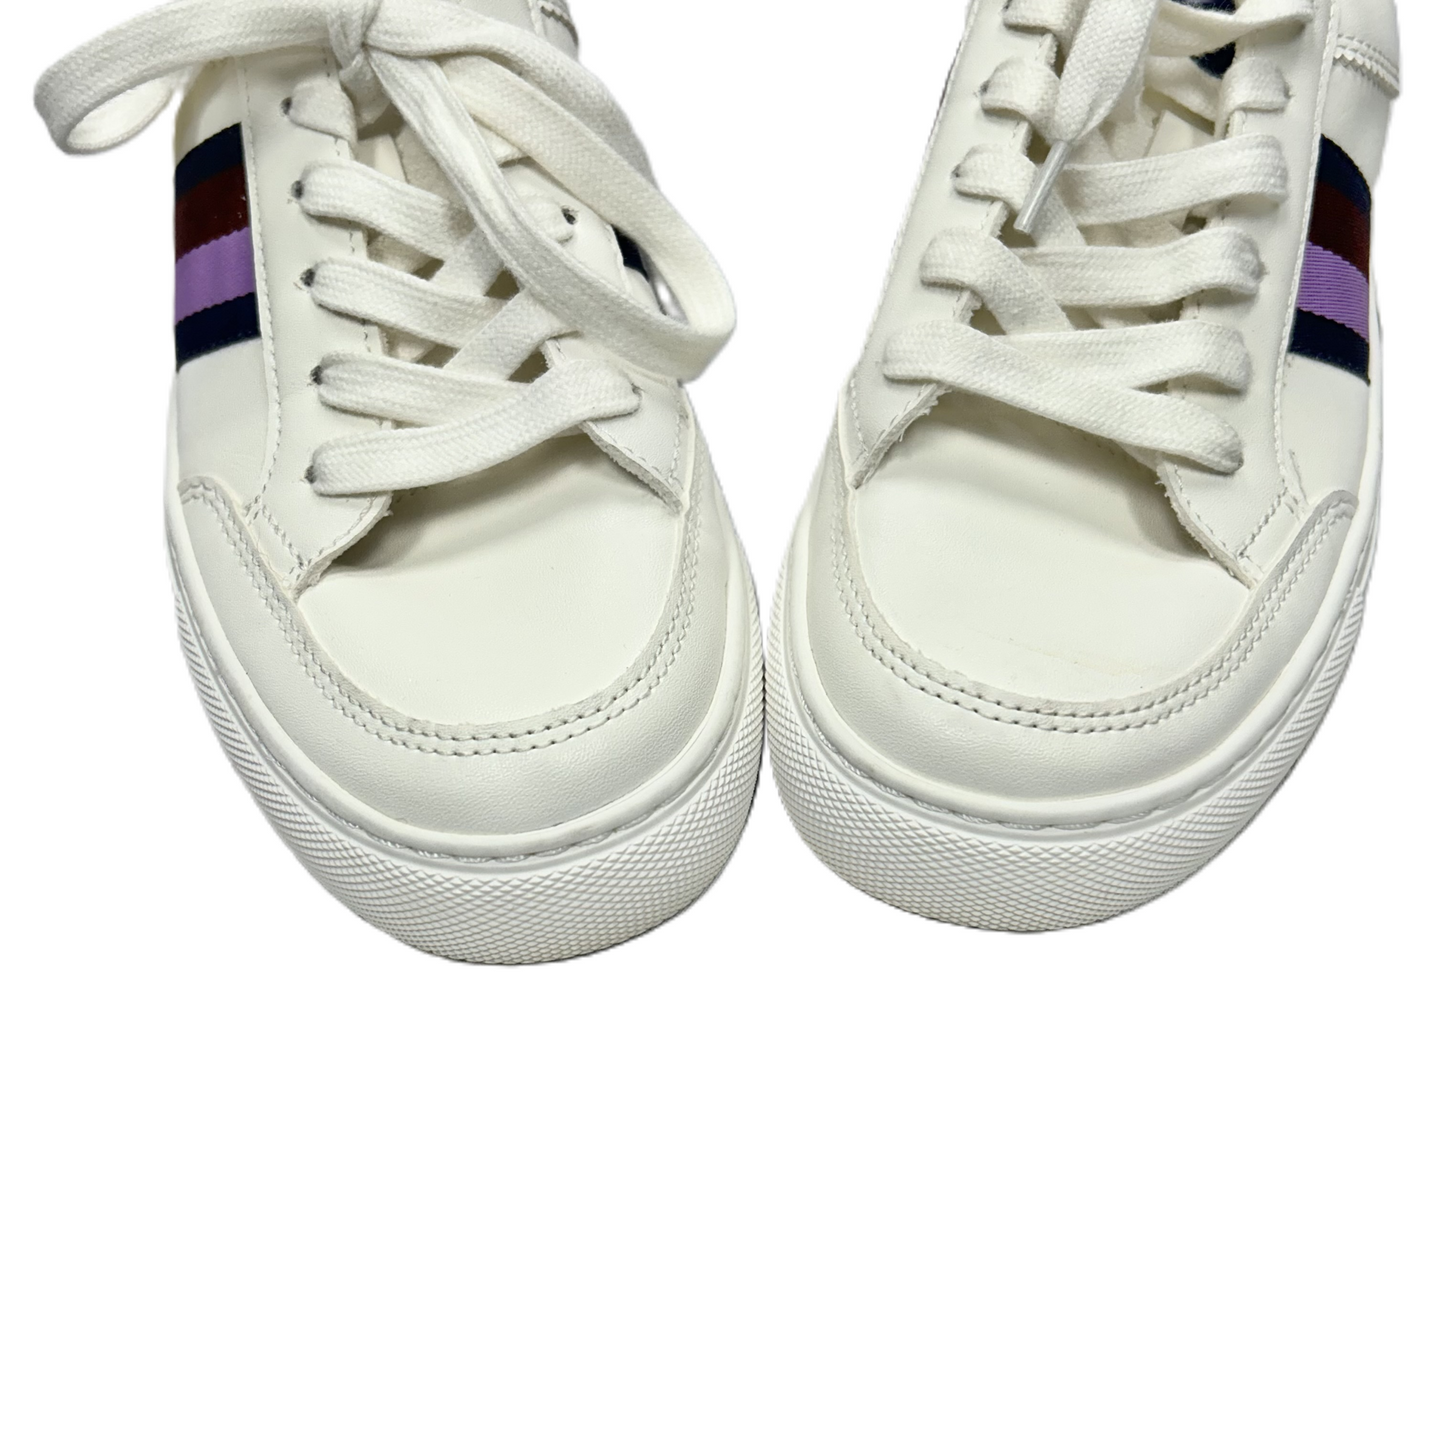 White Shoes Sneakers By J. Crew, Size: 7